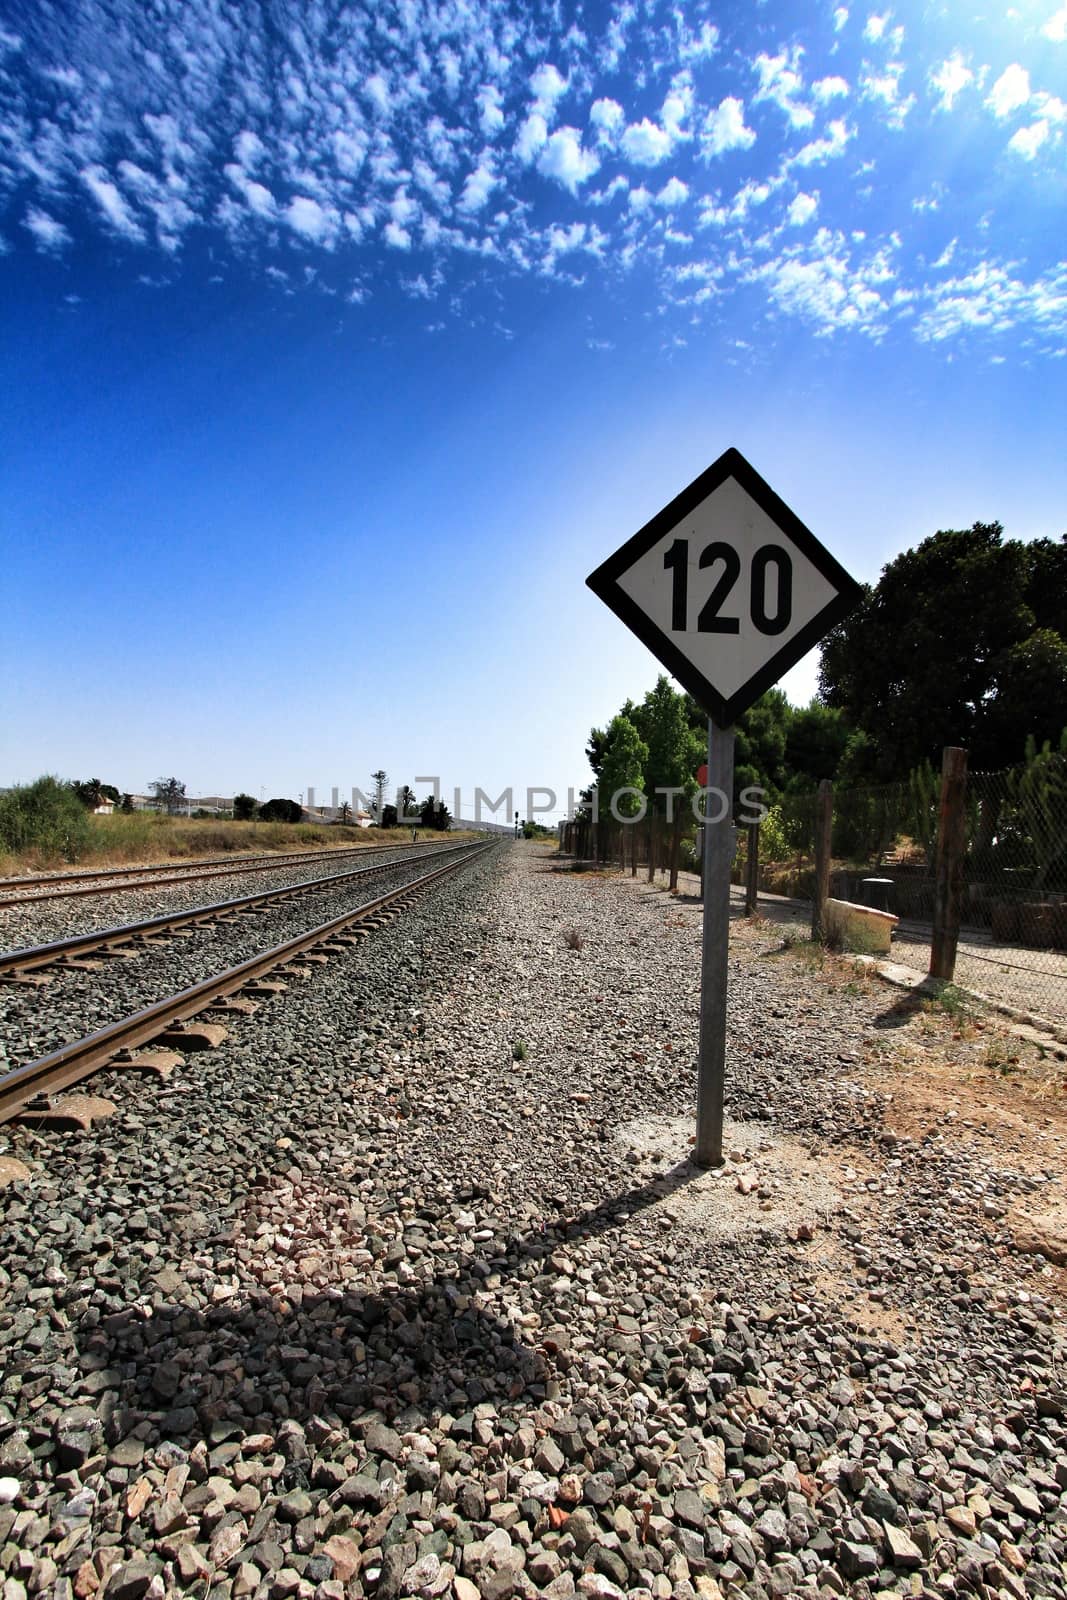 Speed sign limited to 120 km per hour next to train tracks by soniabonet